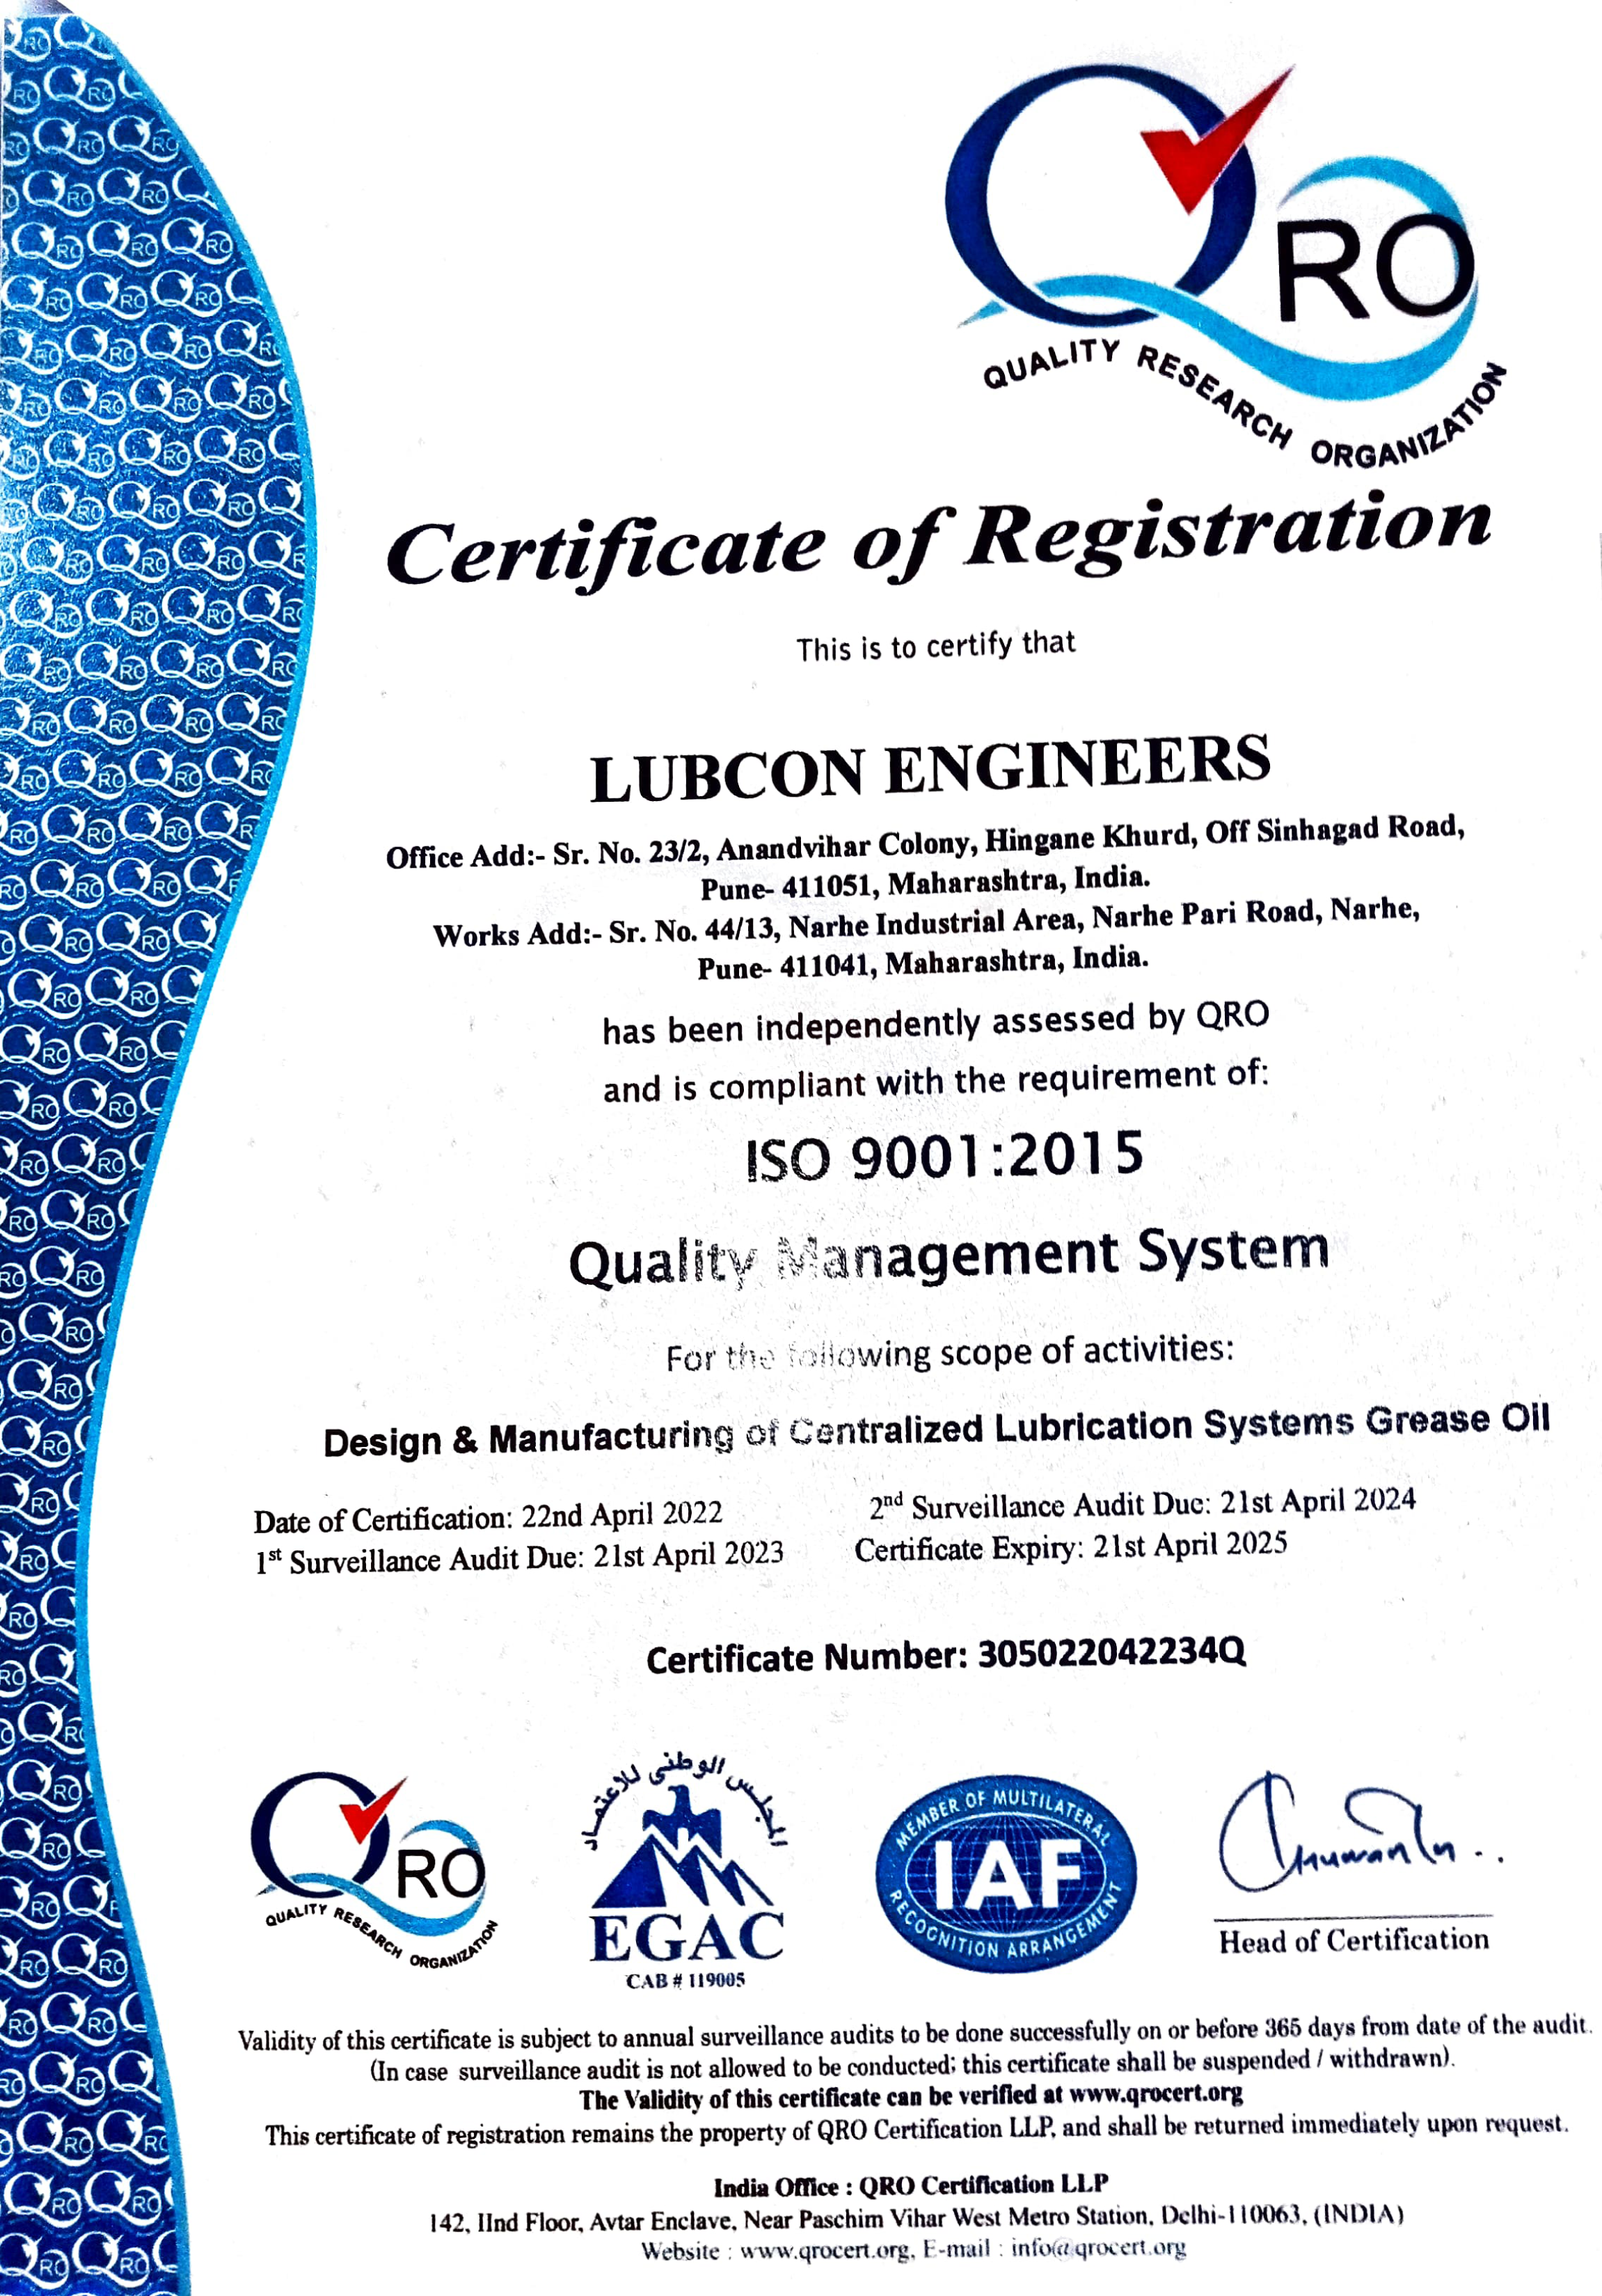 iso-certificate-new